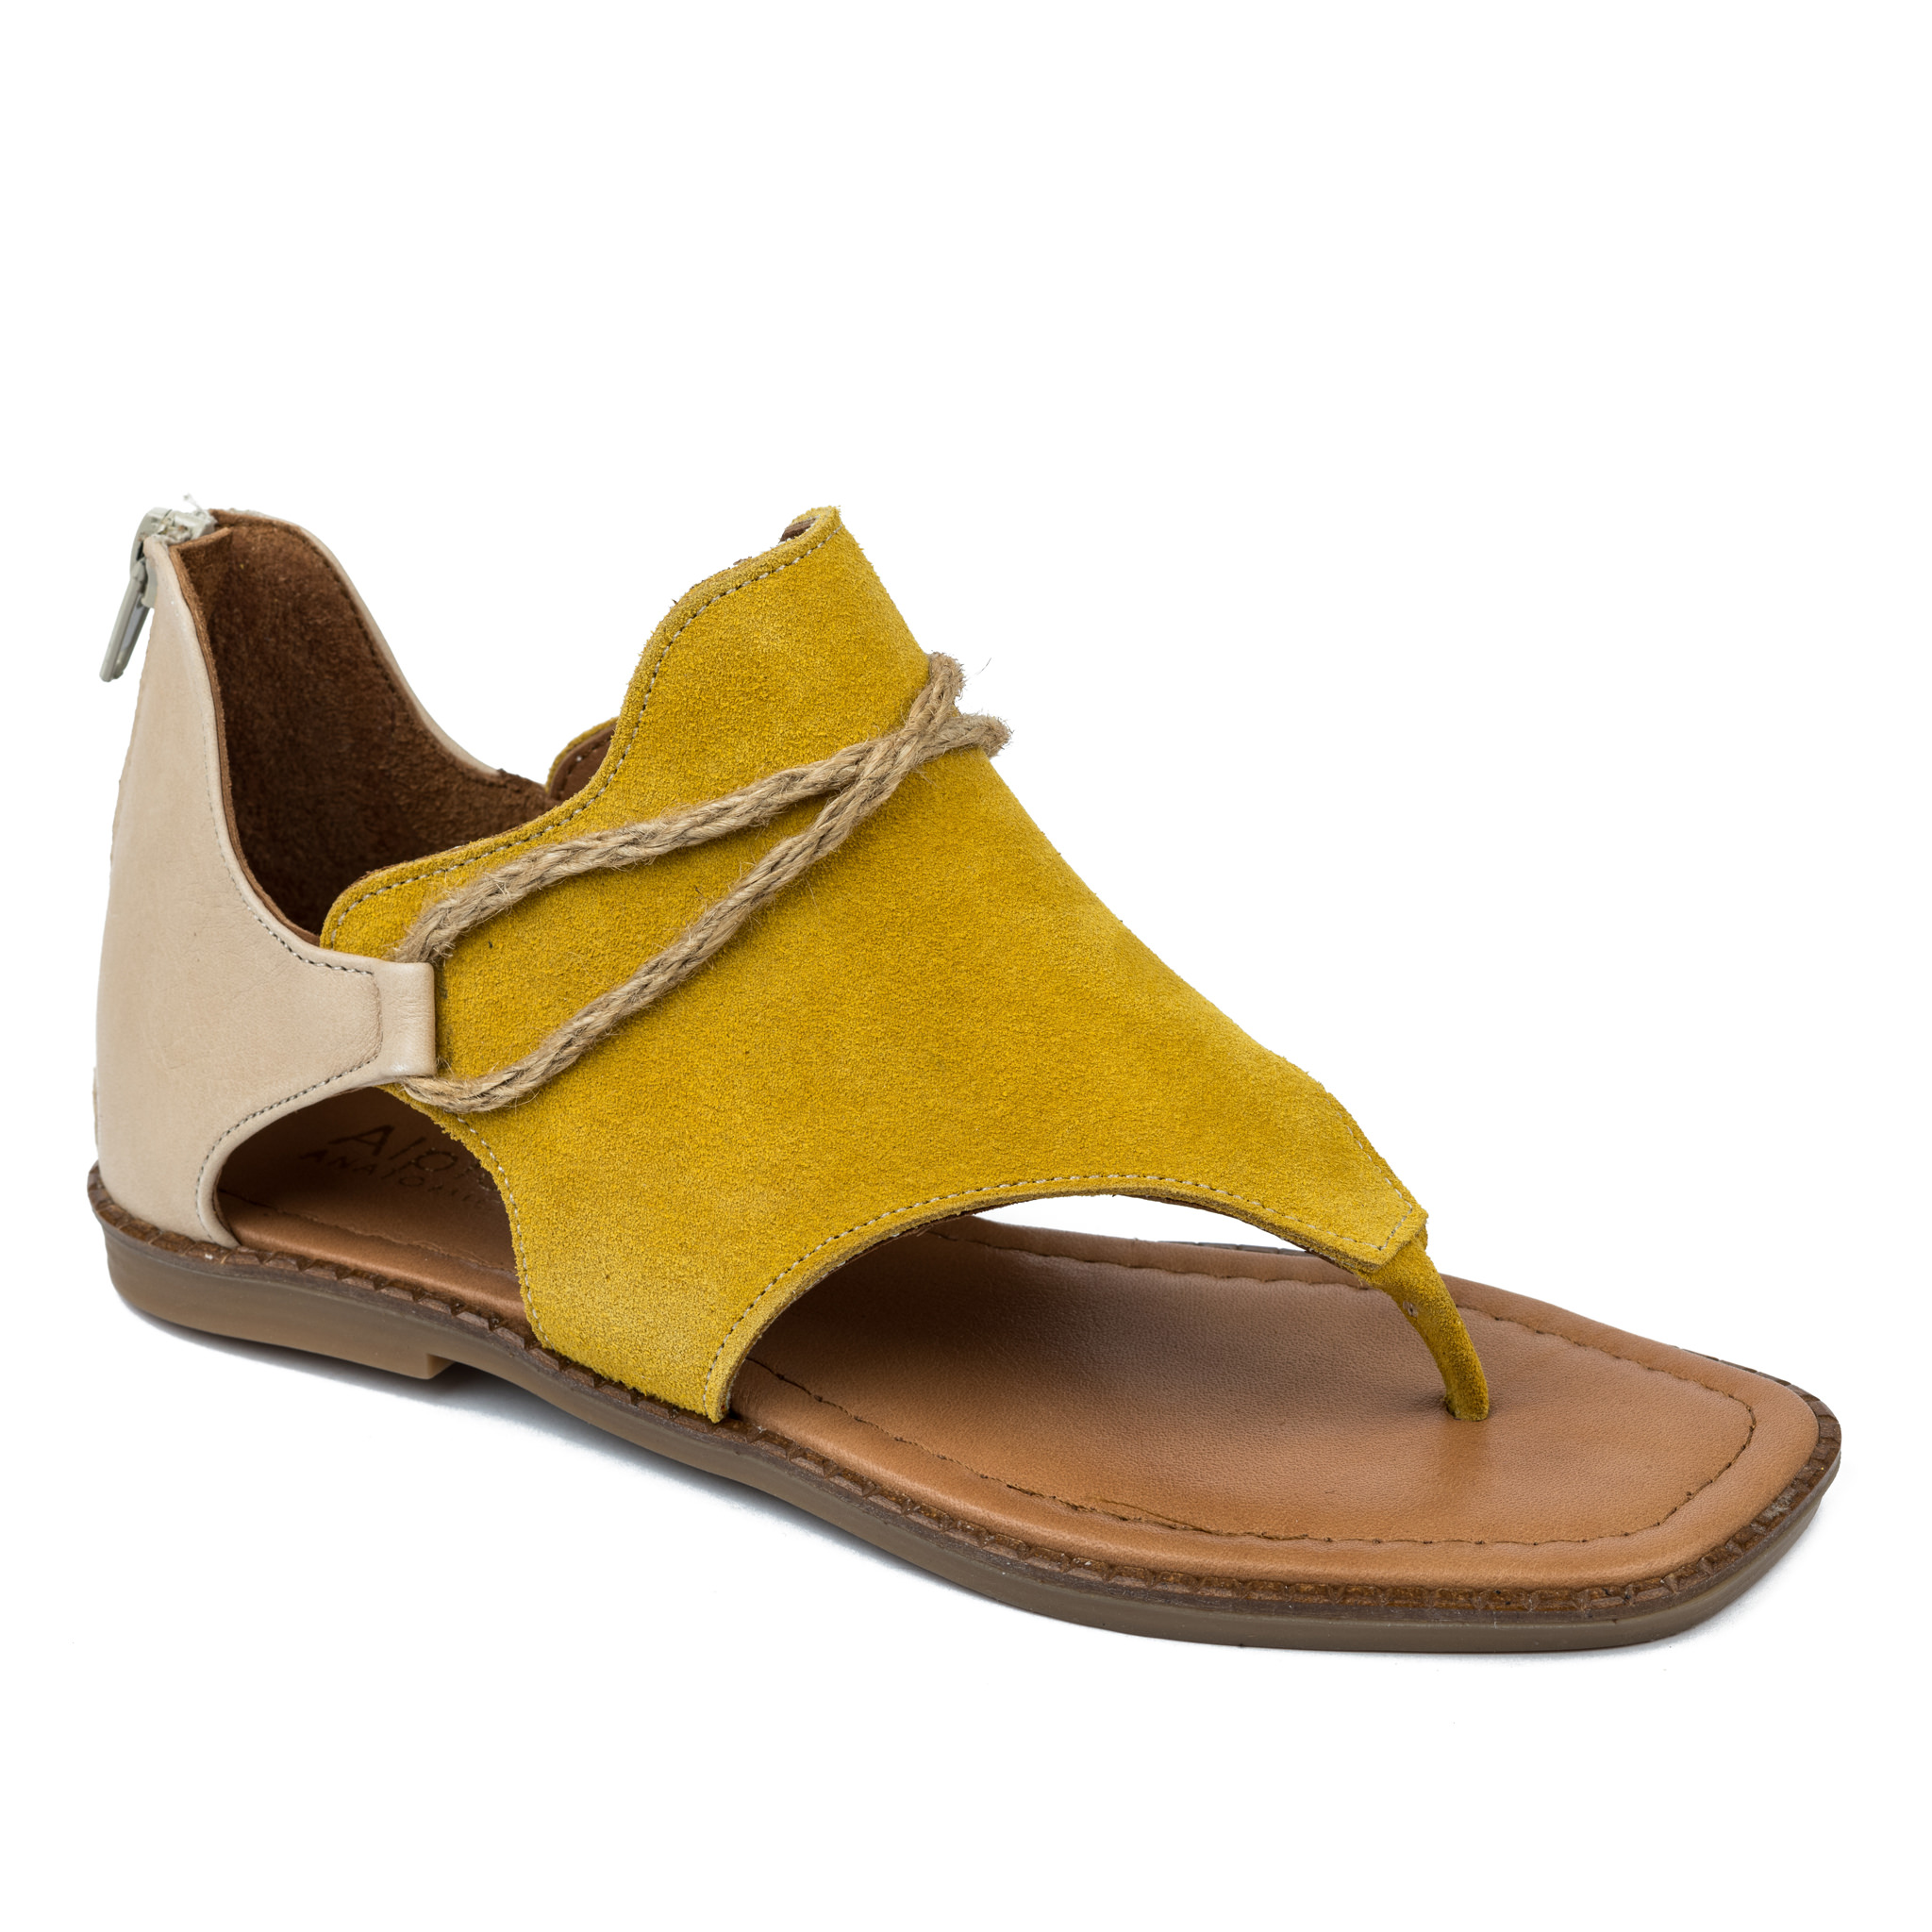 Leather sandals A643 - YELLOW